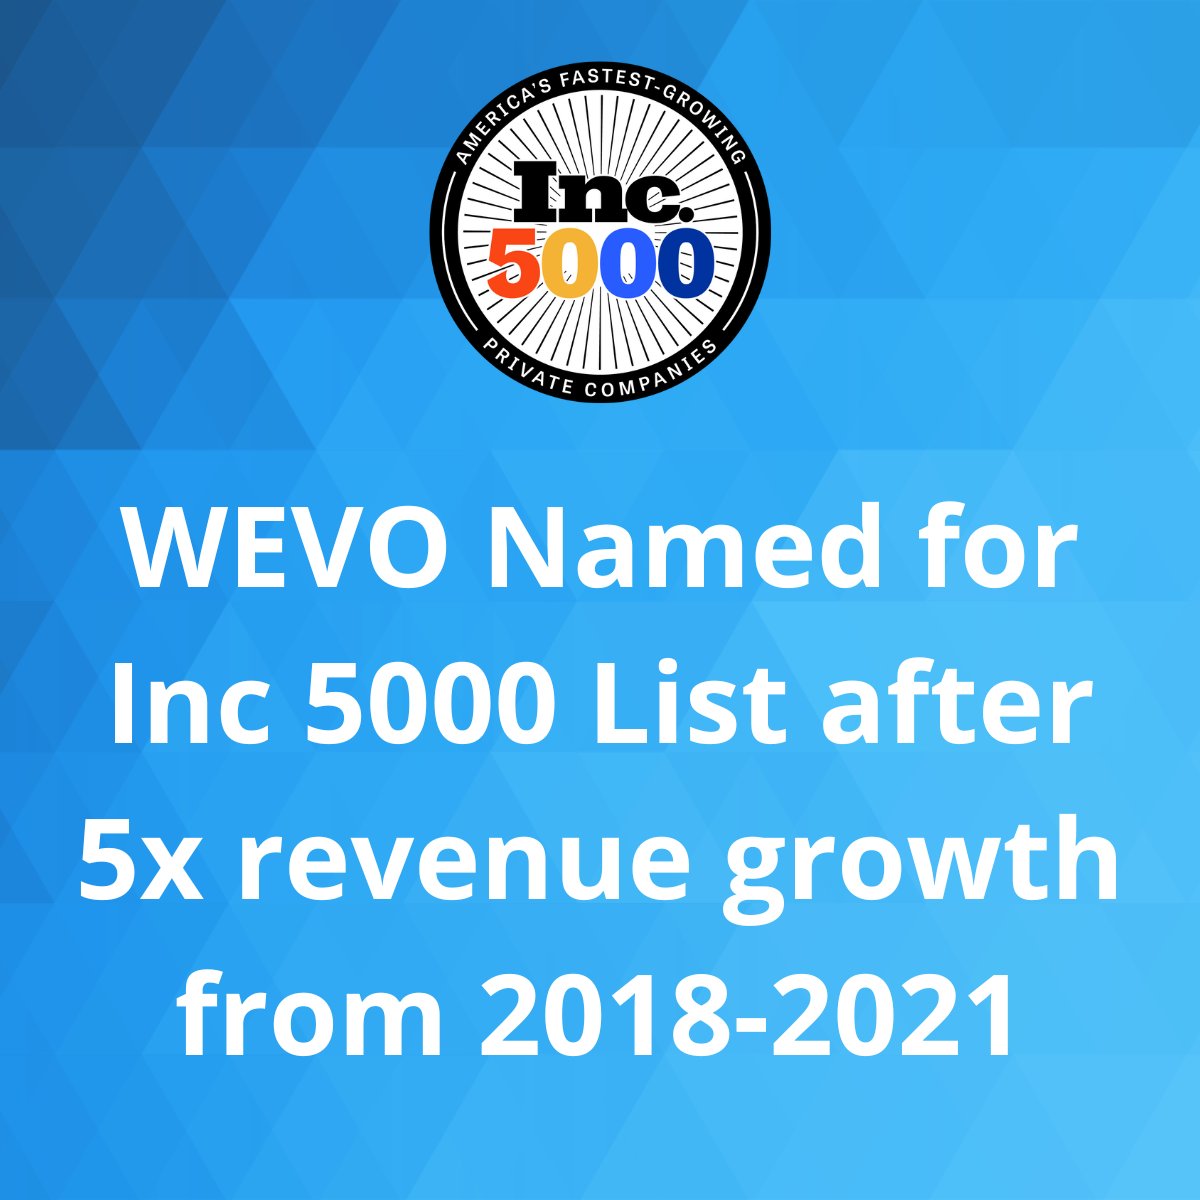 WEVO Conversion, Tuesday, August 16, 2022, Press release picture